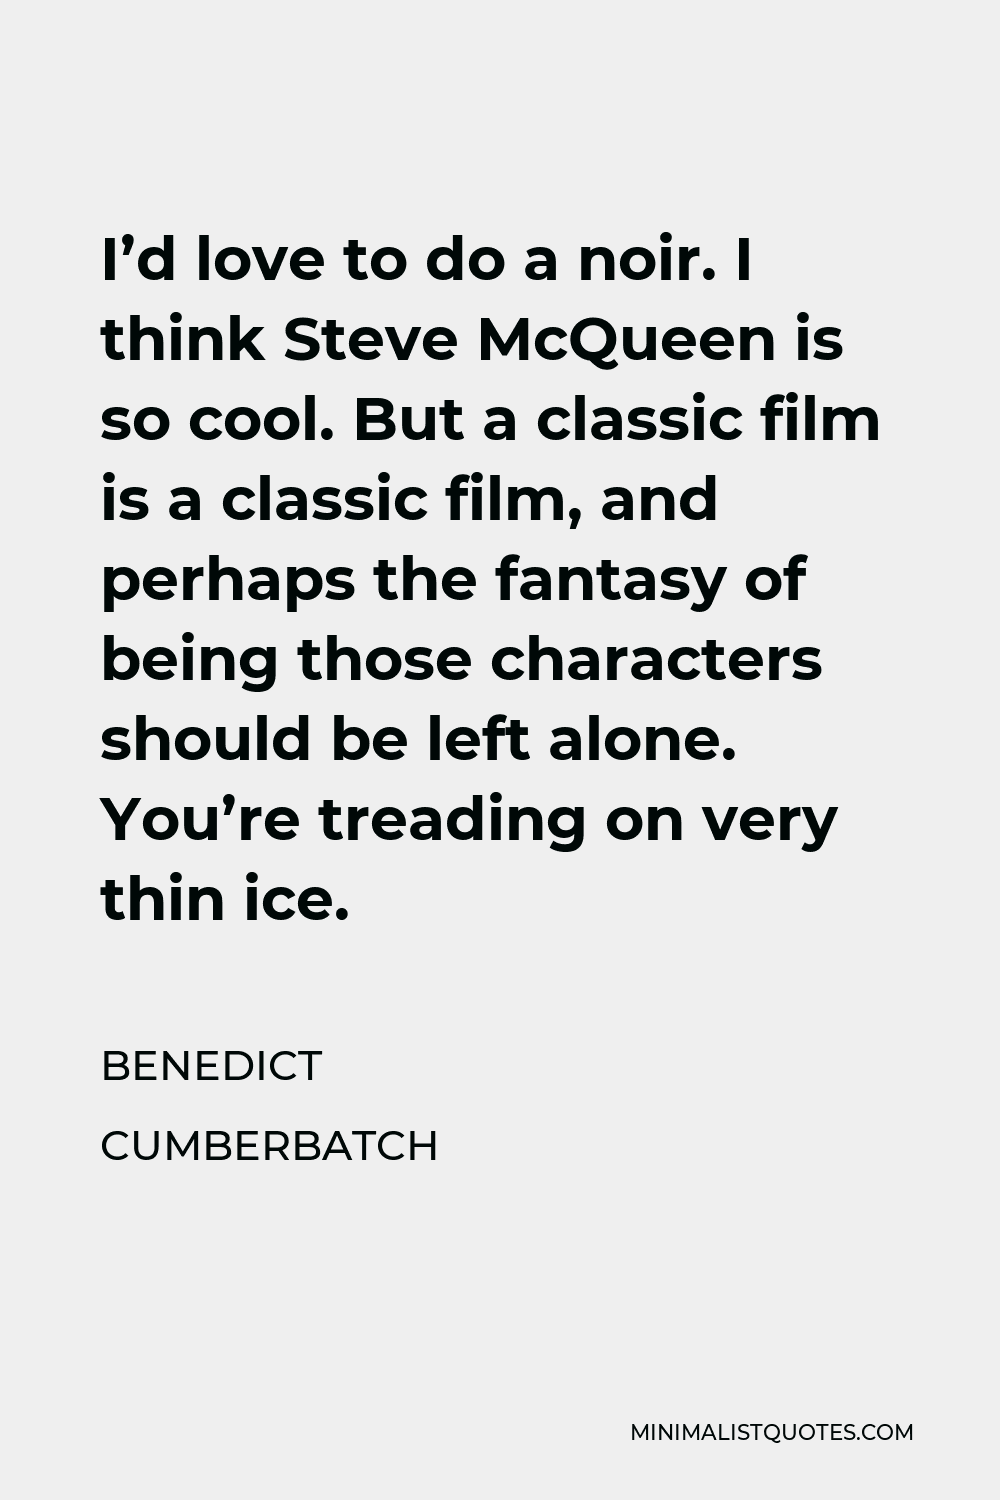 Benedict Cumberbatch Quote - I’d love to do a noir. I think Steve McQueen is so cool. But a classic film is a classic film, and perhaps the fantasy of being those characters should be left alone. You’re treading on very thin ice.